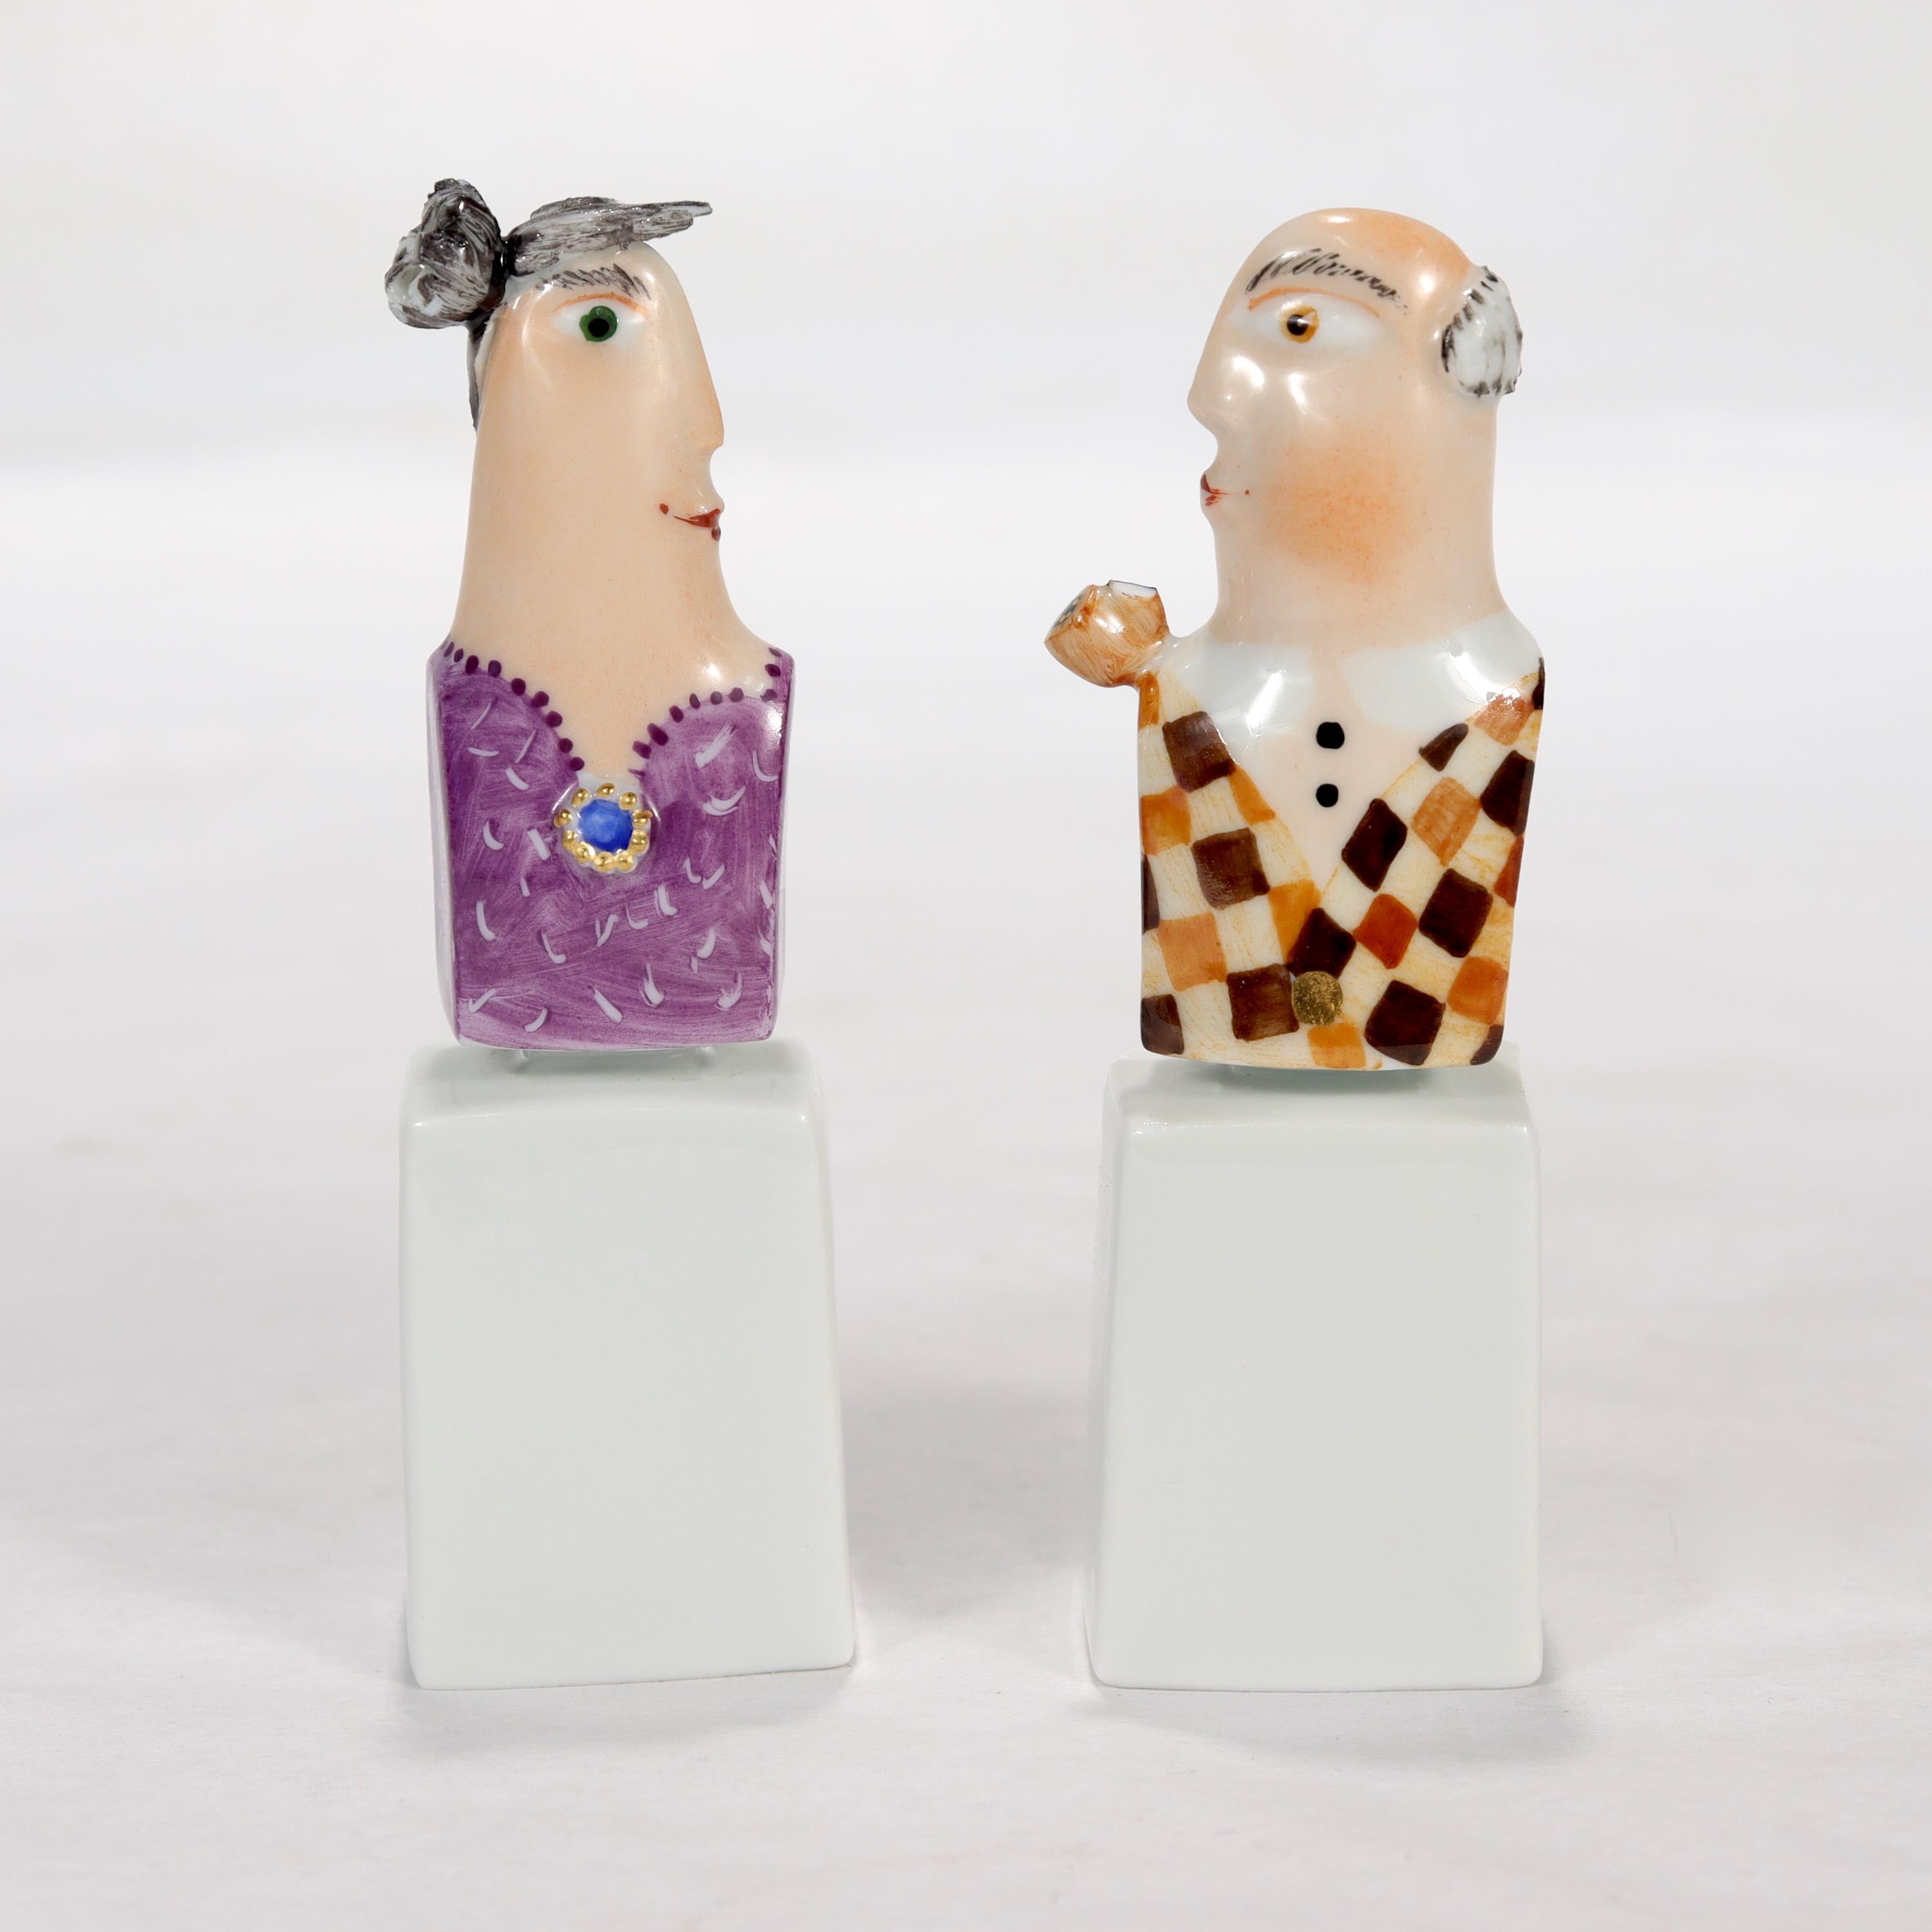 A fine pair of miniature Meissen porcelain busts.

By Peter Strang. 

In the form of a man and woman in casual clothing. The man wears an argyle sweater and is smoking a pipe, and the woman is in a purple dress with a blue brooch.

Each bust rests